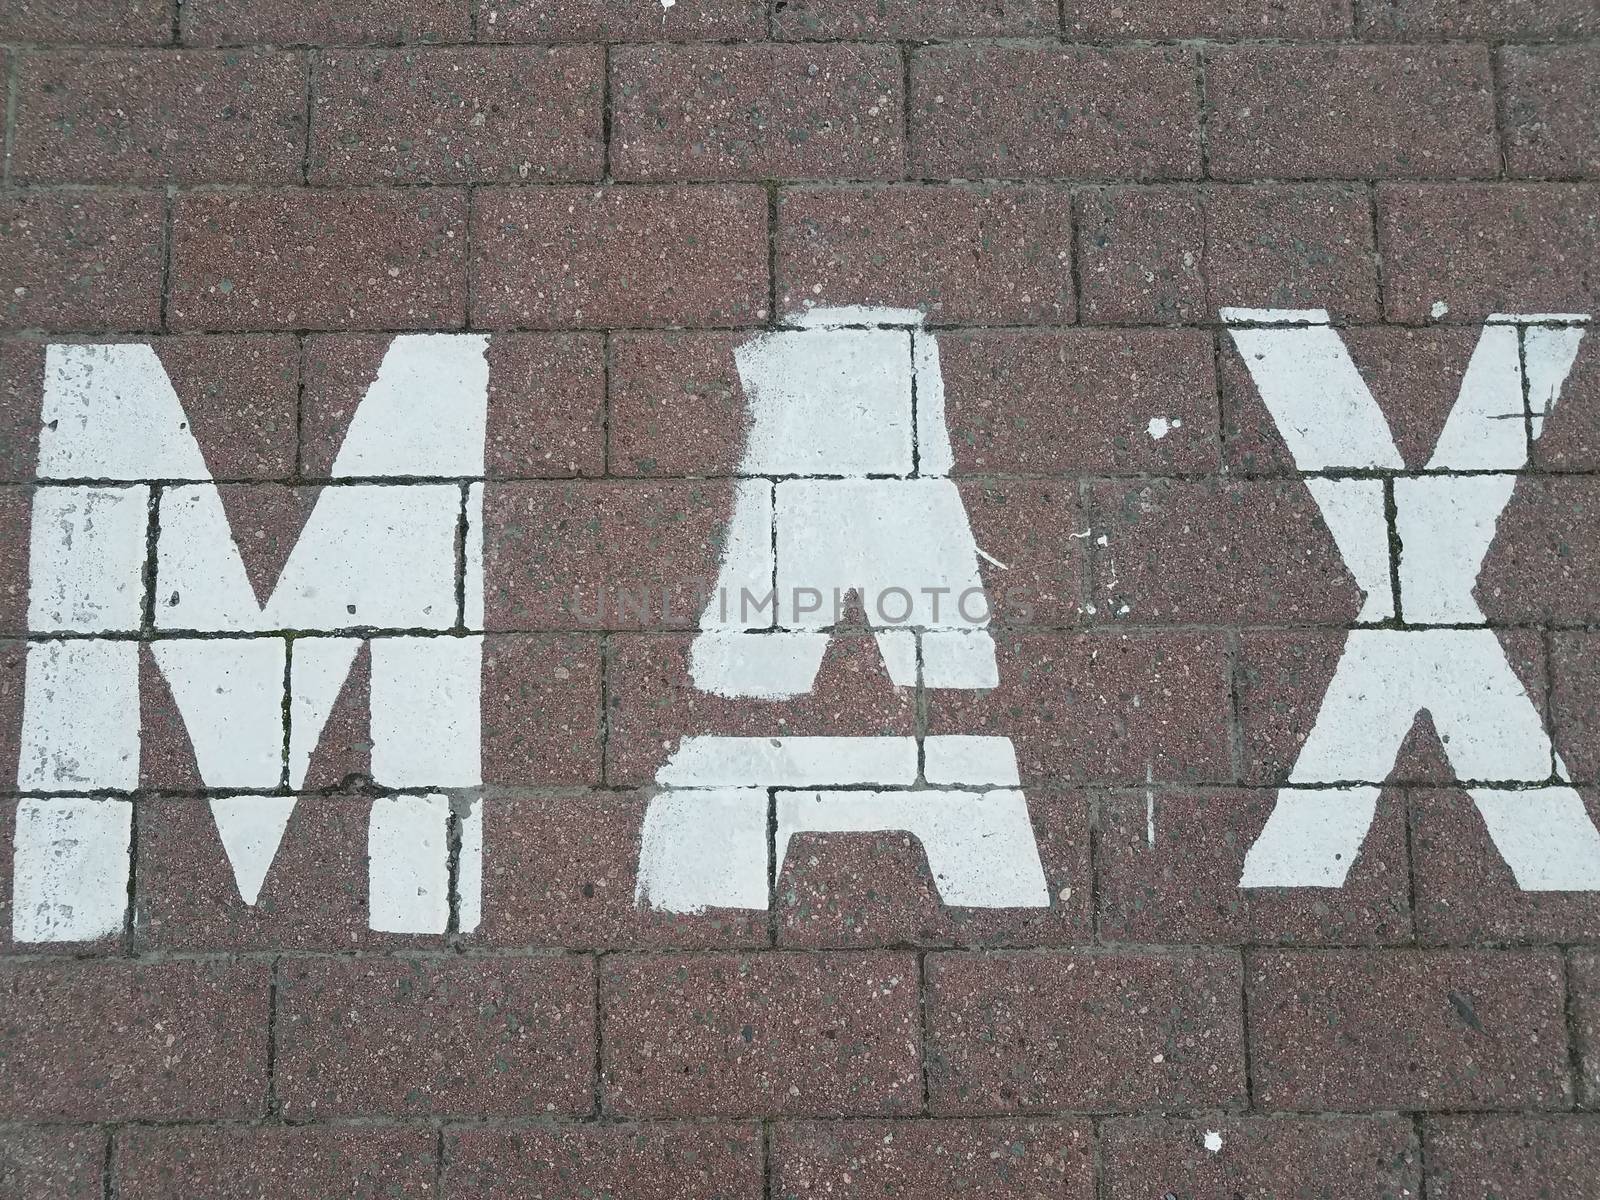 white painted max on bricks on ground or floor by stockphotofan1